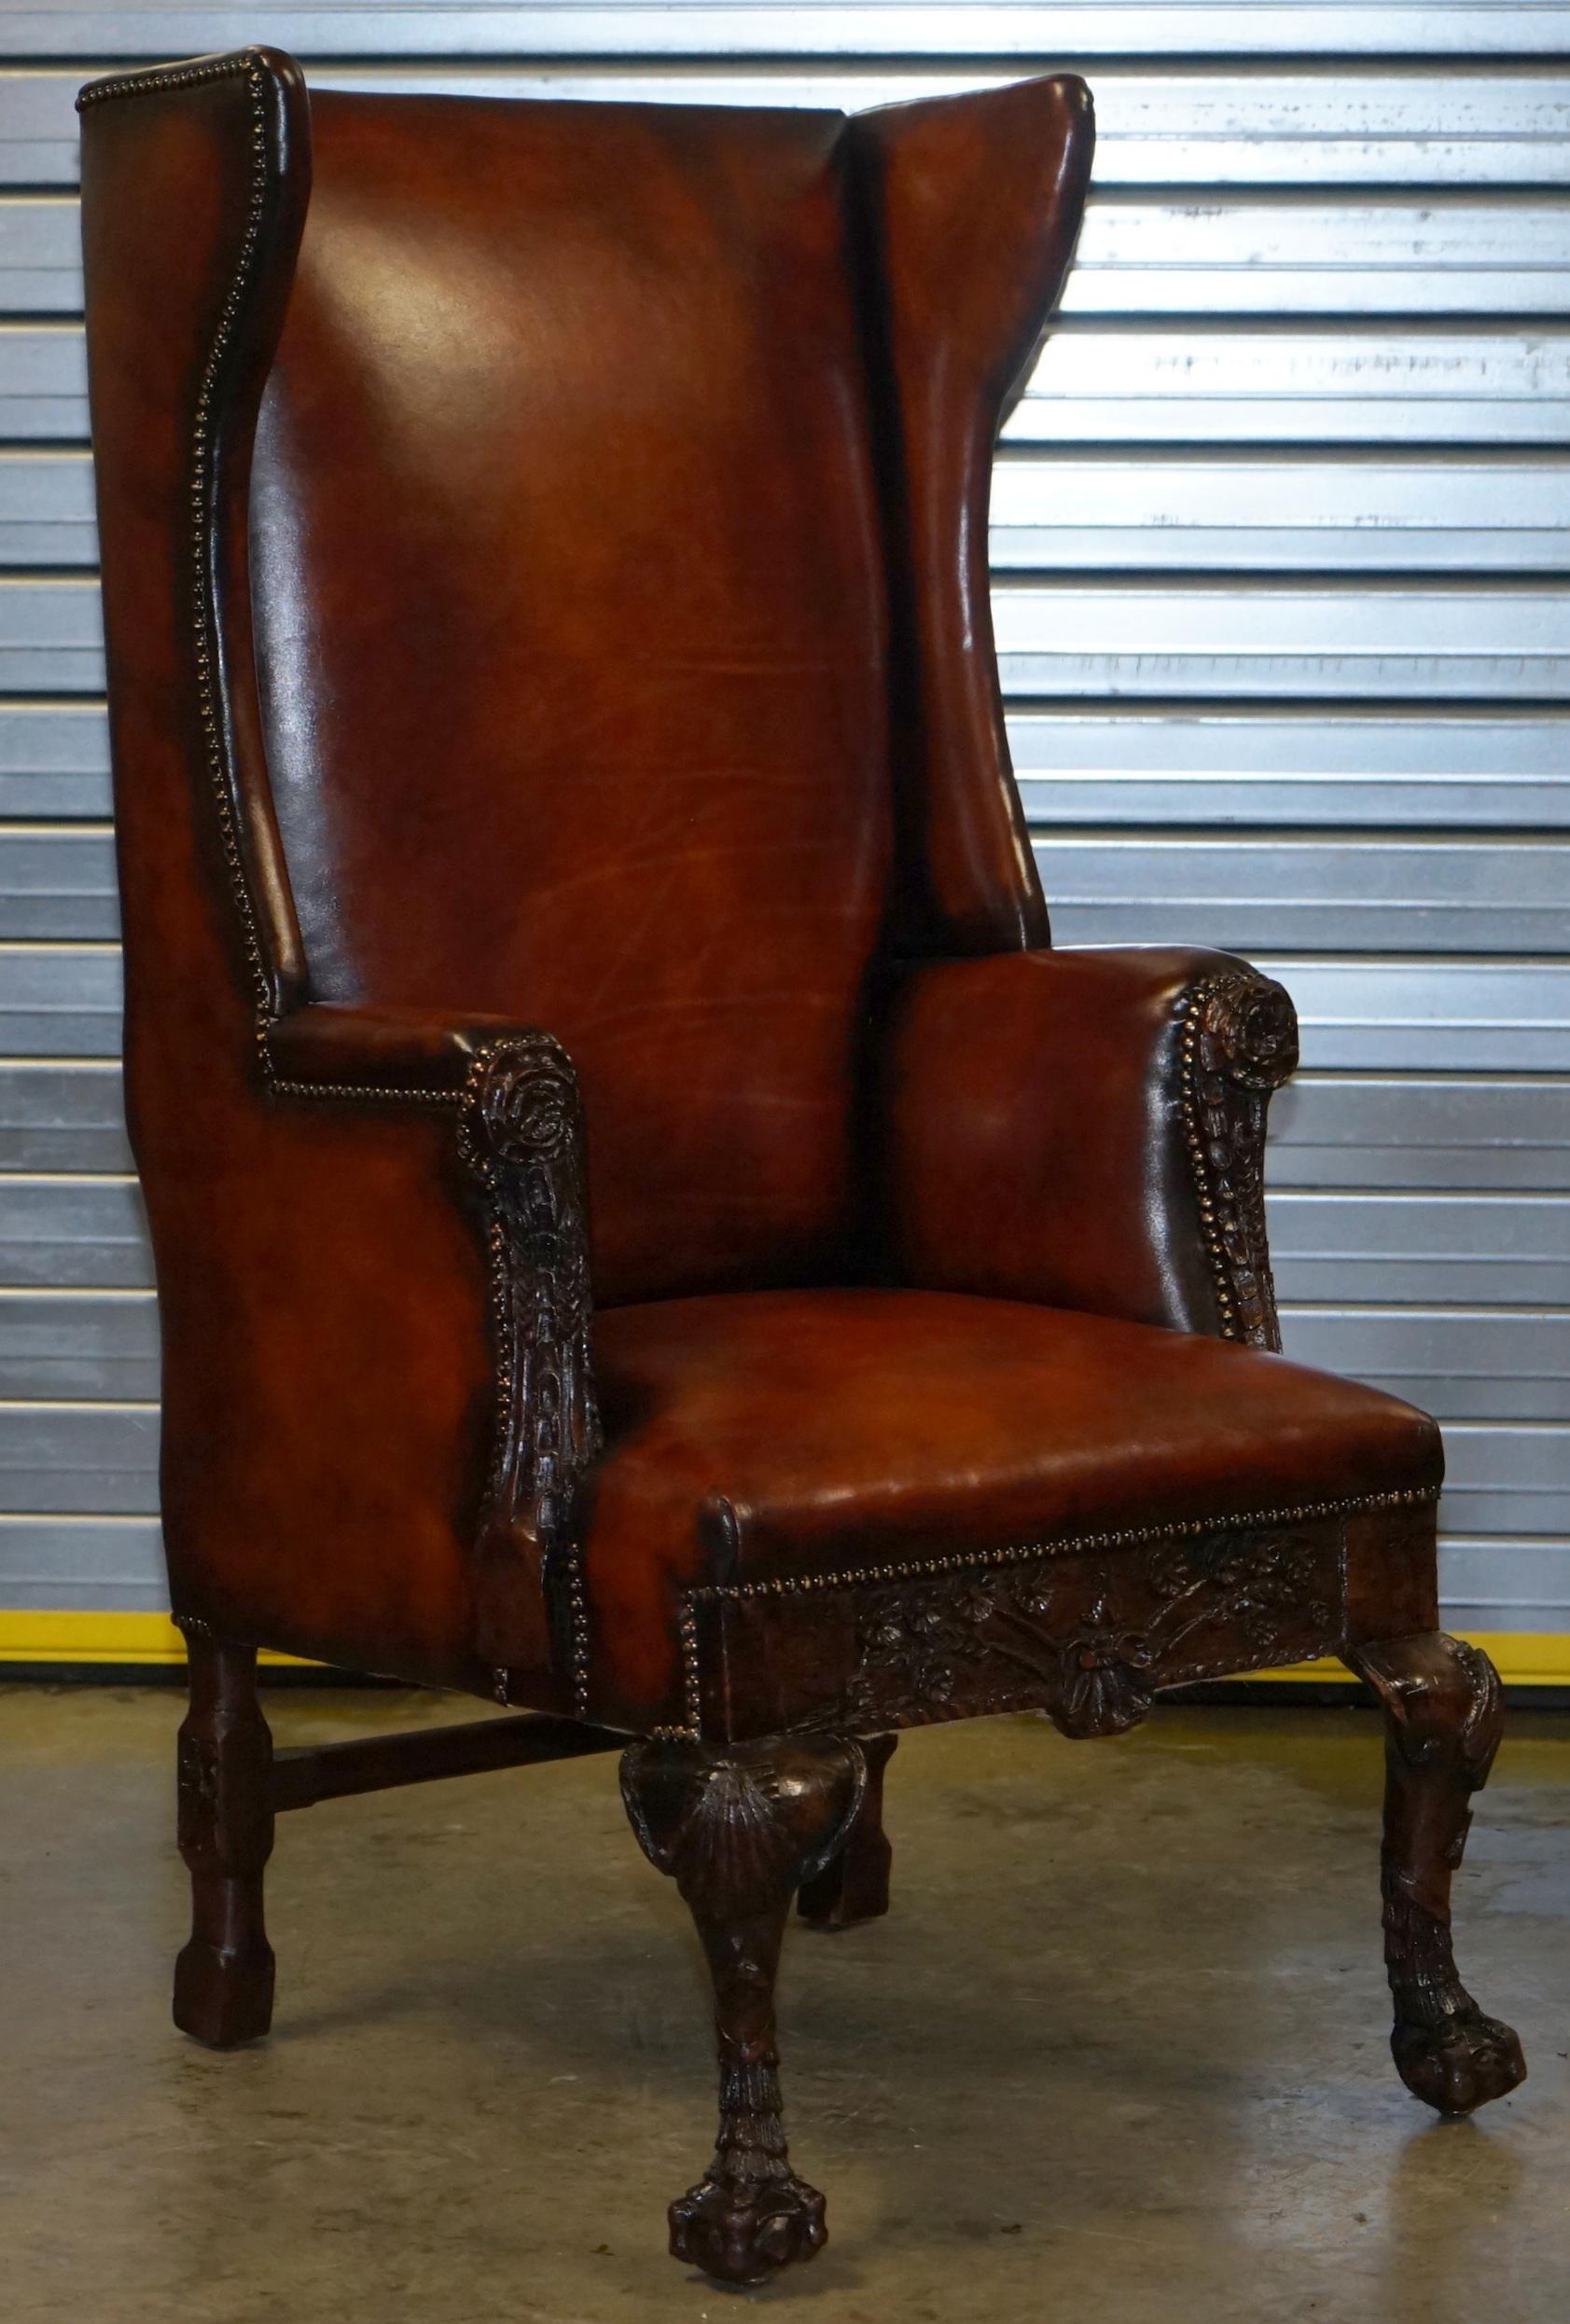 We are delighted to offer for sale this stunning very rare original George I early 18th century circa 1720 high back wing armchair fully restored 

This chair is exceptionally rare, it is nearly 300 years old from new, all the timber is hand